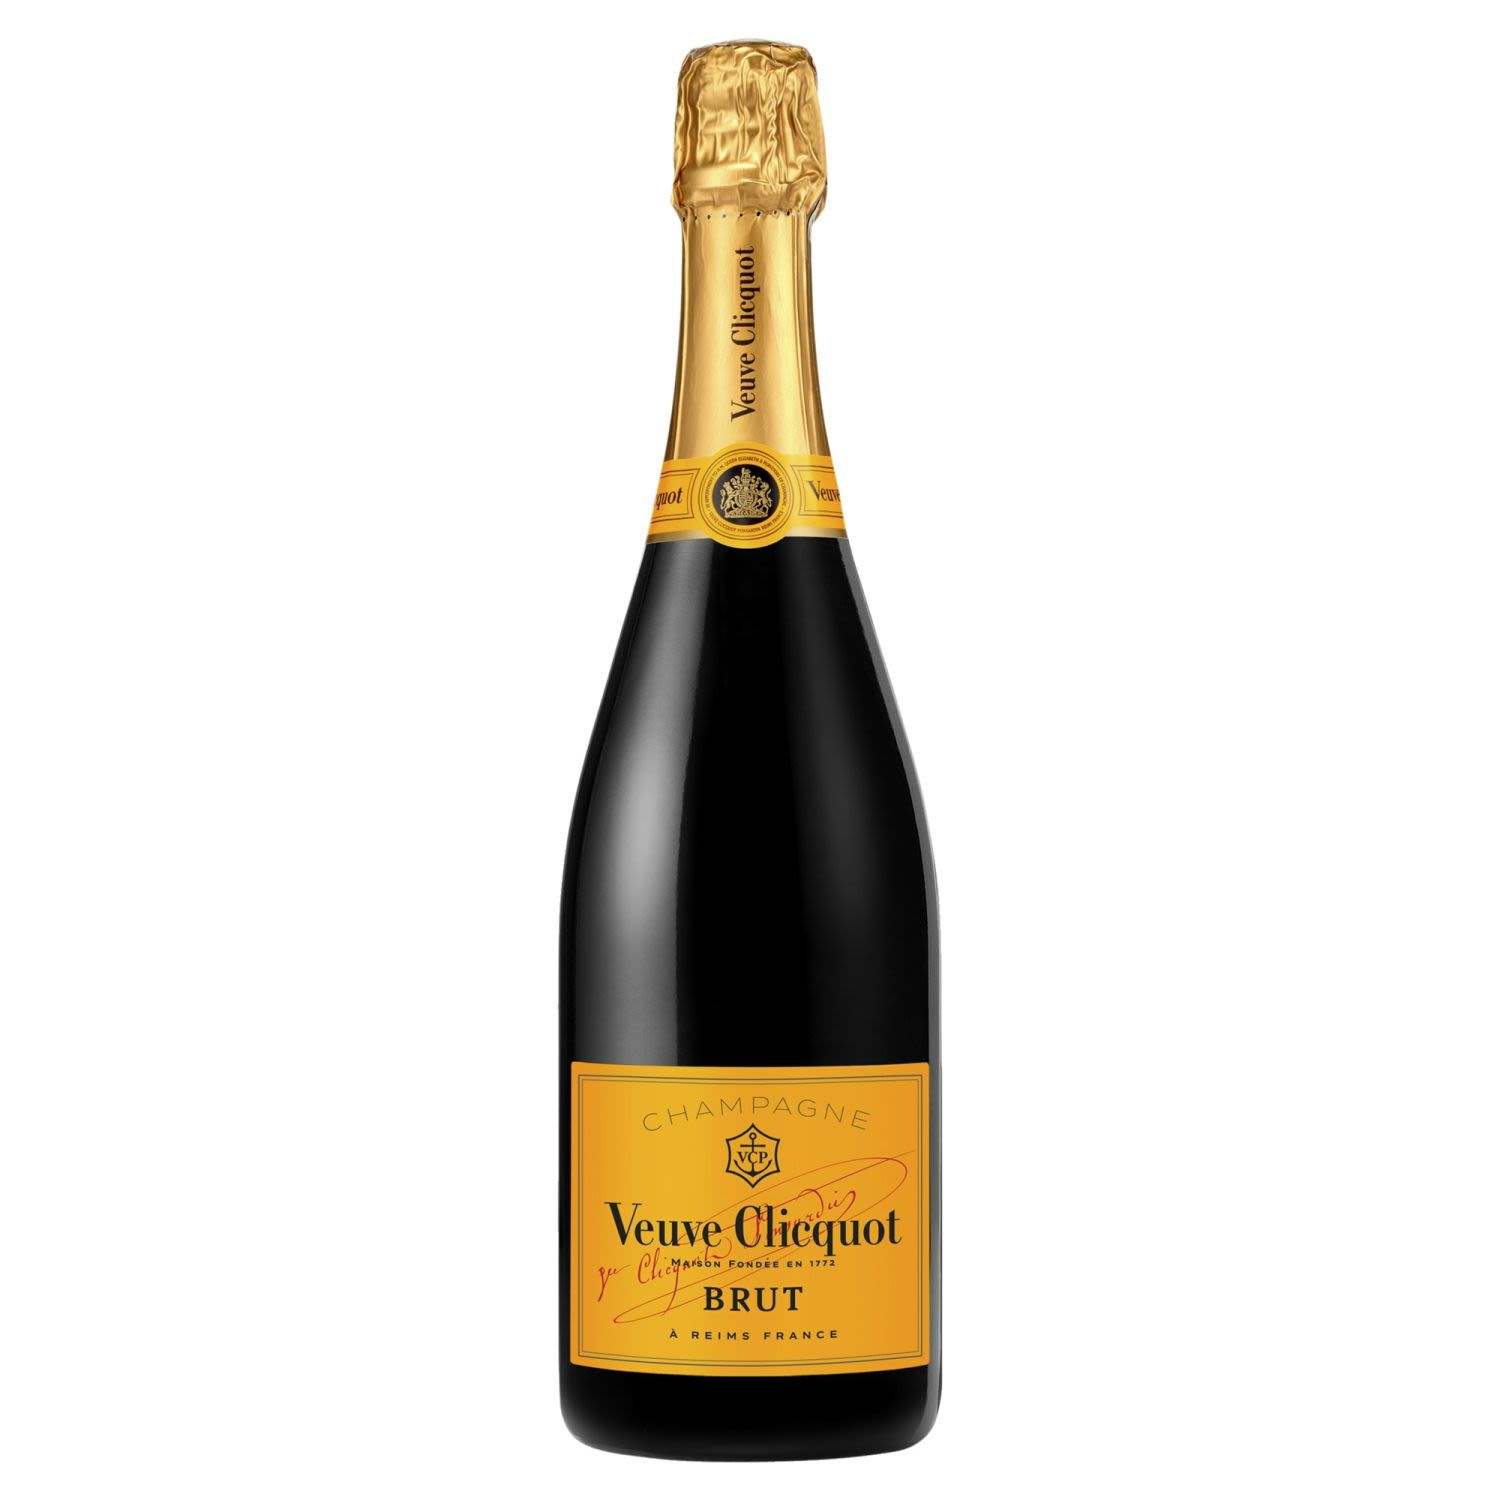 Founded in 1772, Veuve Clicquot has since lived by its motto, "Only one quality, the finest". "Yellow Label" is its signature wine, defining the Veuve Clicquot style through a perfect balance of strength, aromatic intensity, freshness & silkiness.<br /> <br />Alcohol Volume: 12.00%<br /><br />Pack Format: Bottle<br /><br />Standard Drinks: 7.1</br /><br />Pack Type: Bottle<br /><br />Country of Origin: France<br /><br />Region: Champagne<br /><br />Vintage: Non Vintage<br />